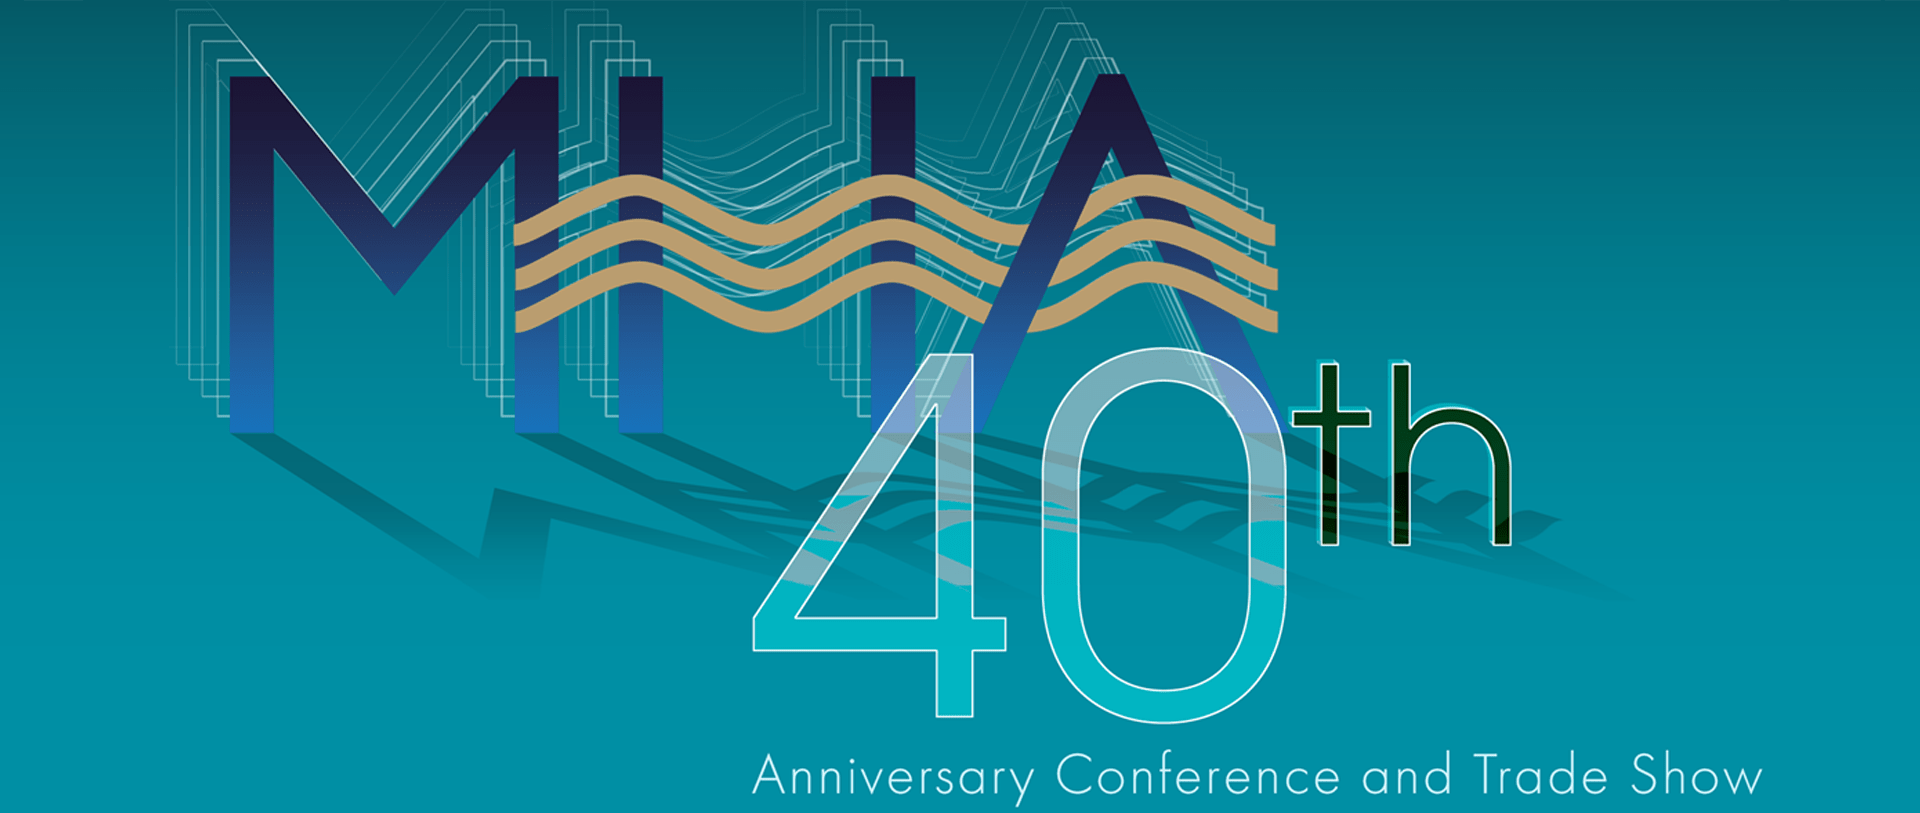 40th anniversary conference spash image